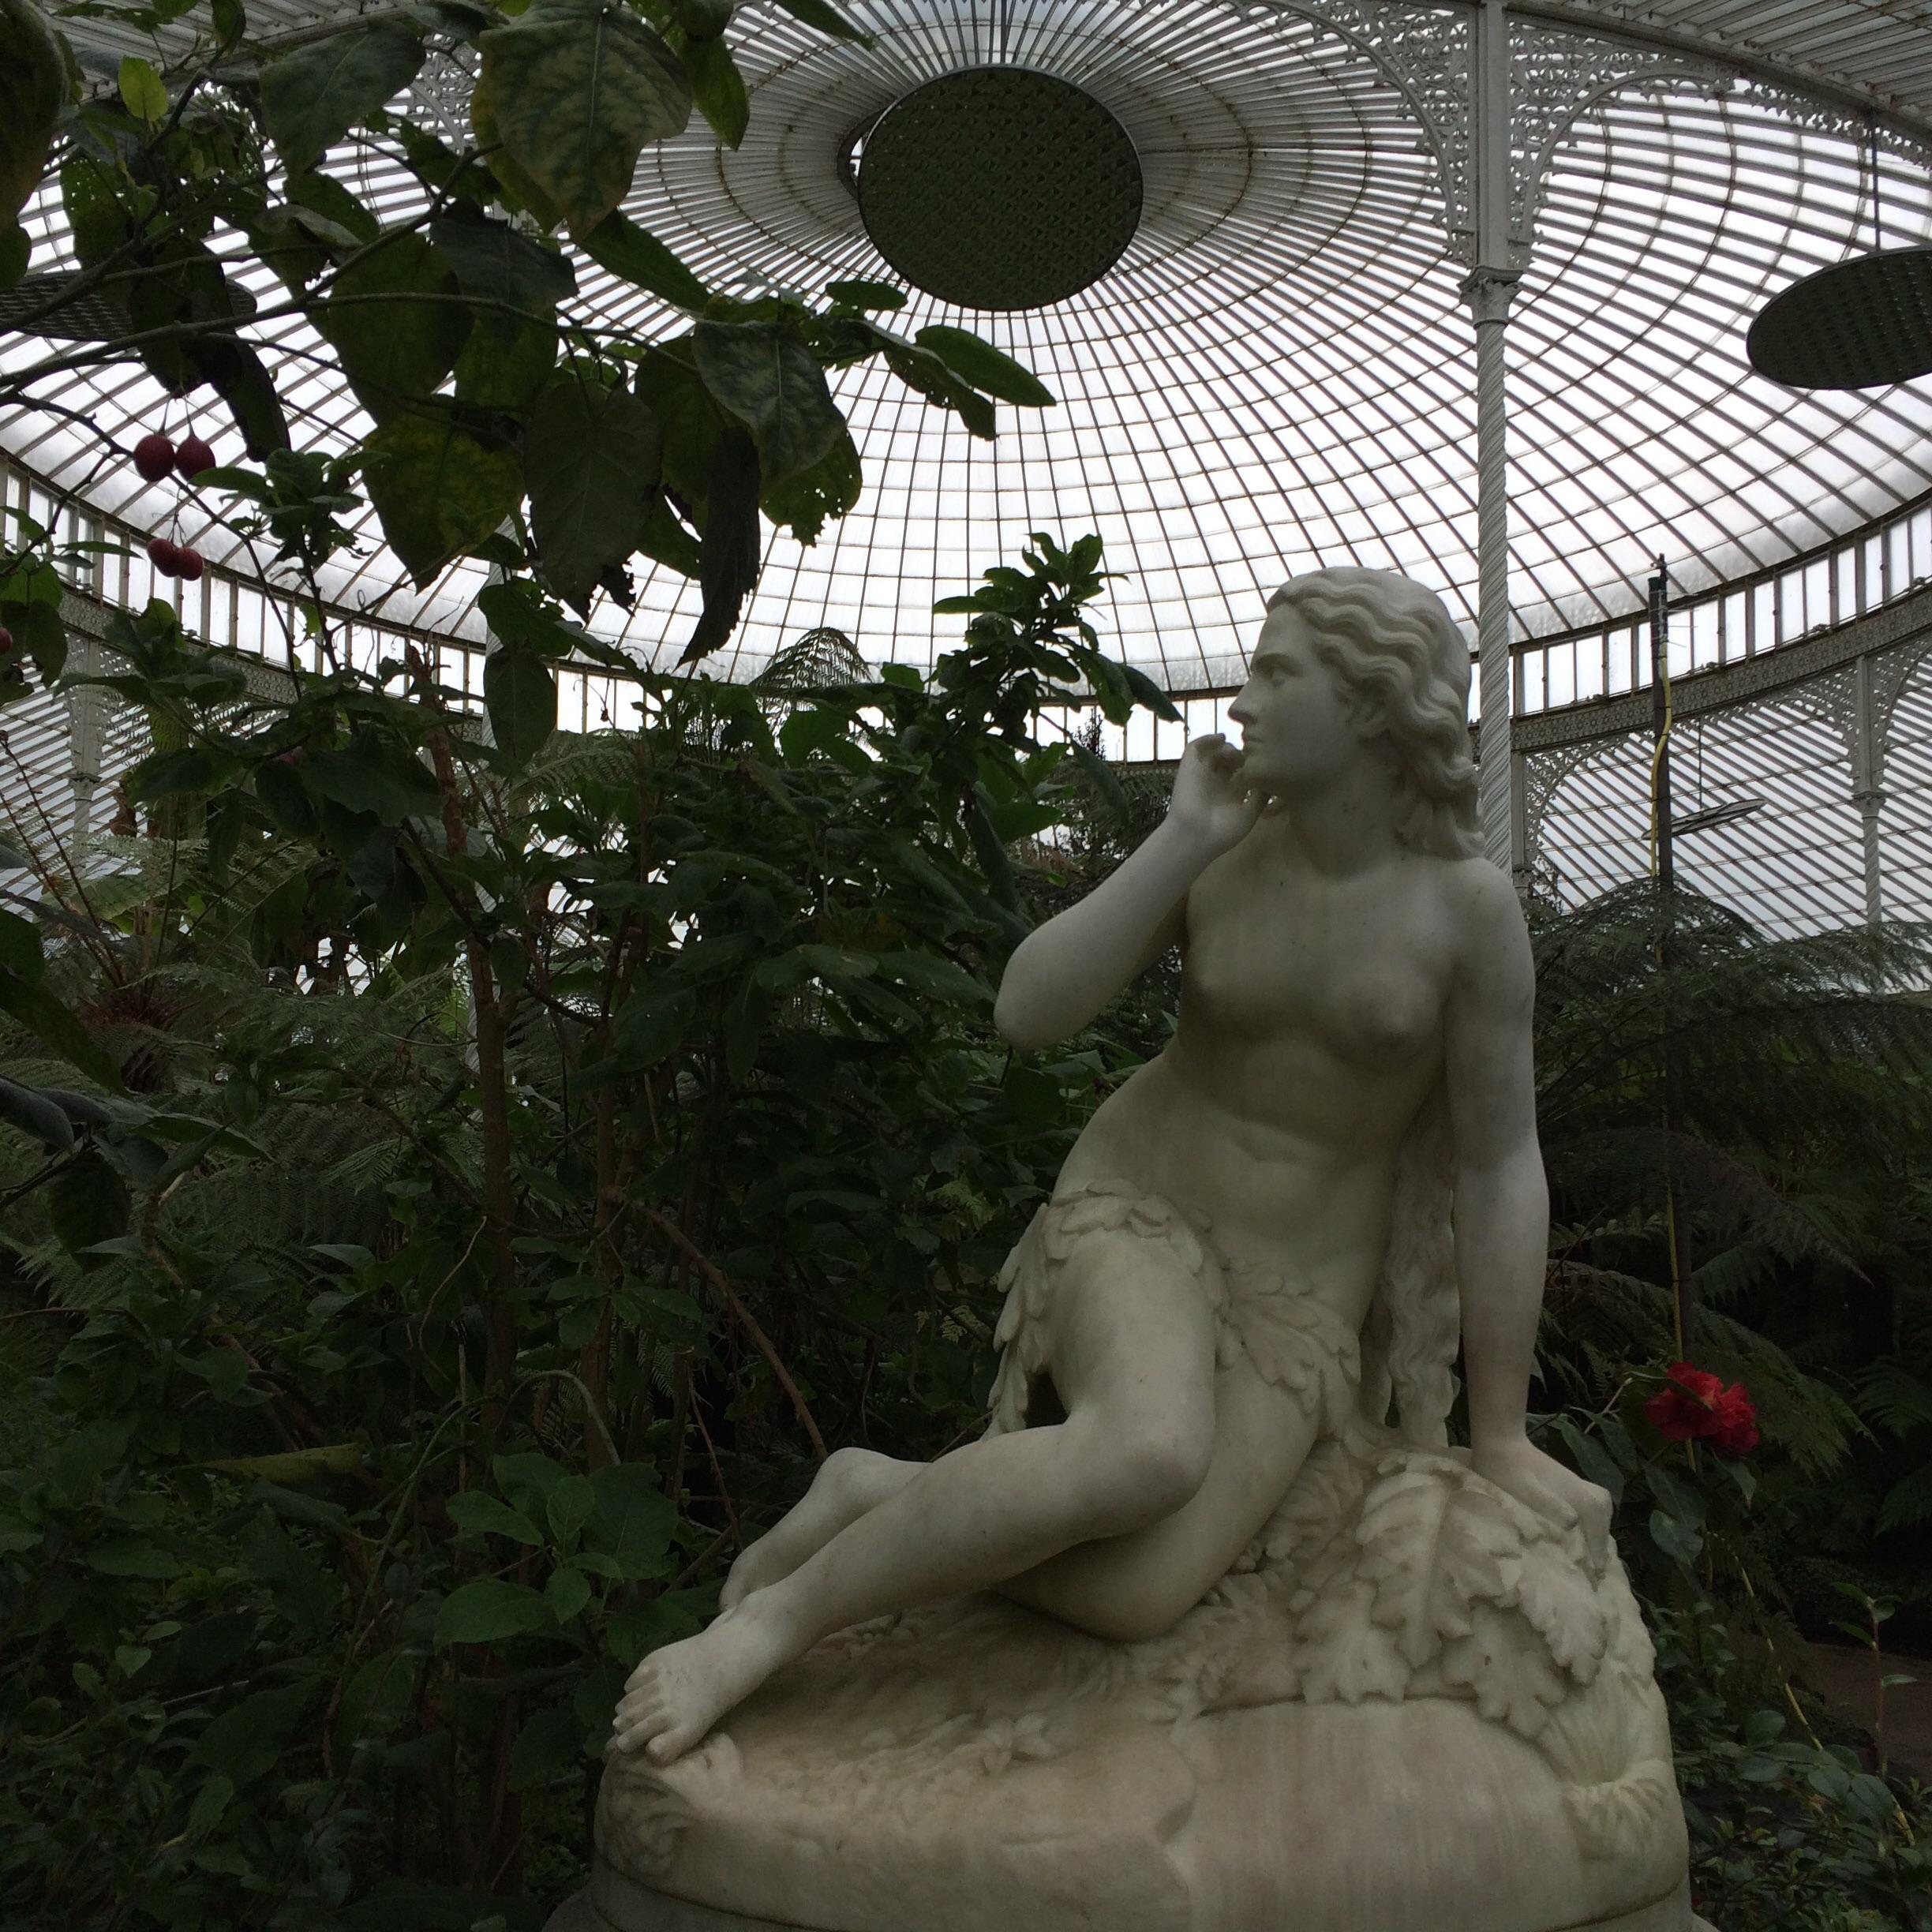 Cover image of this place Kibble Palace